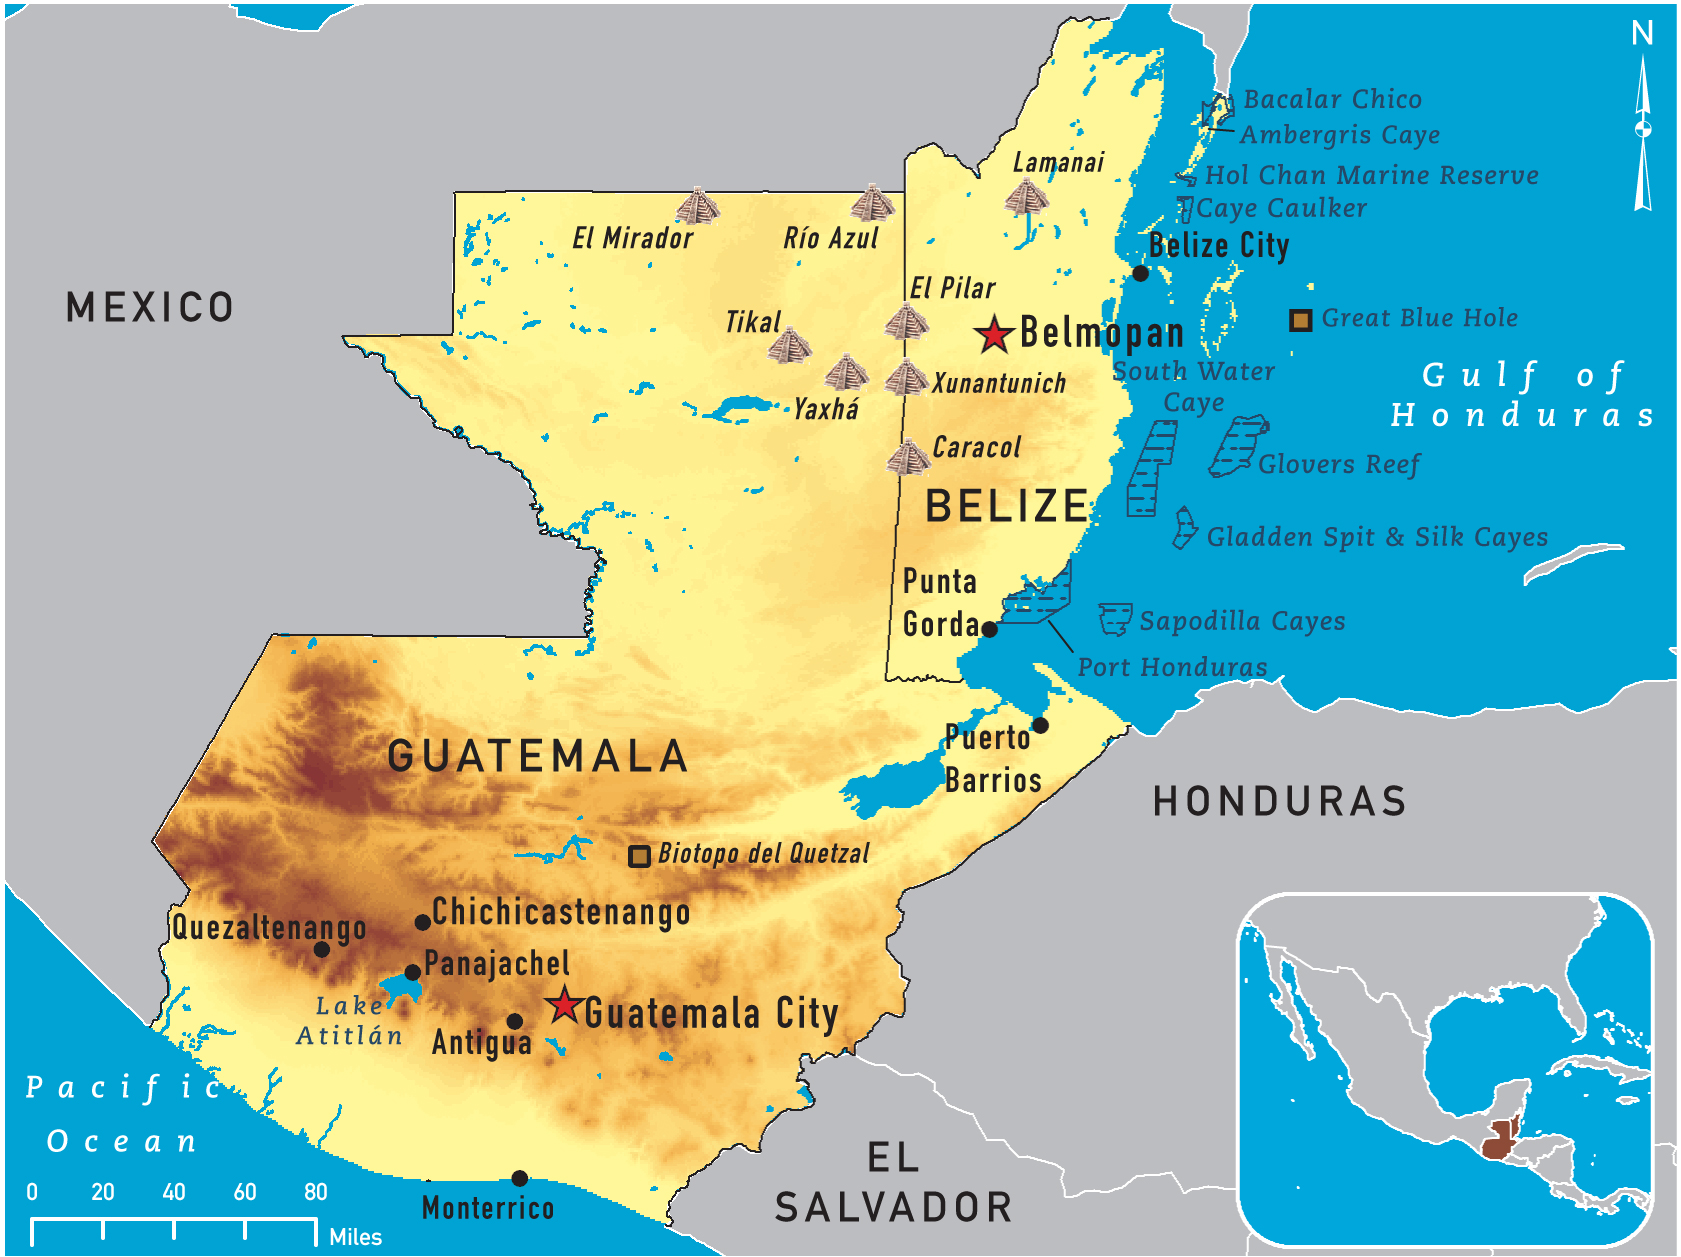 Map of Guatemala and Belize 2011